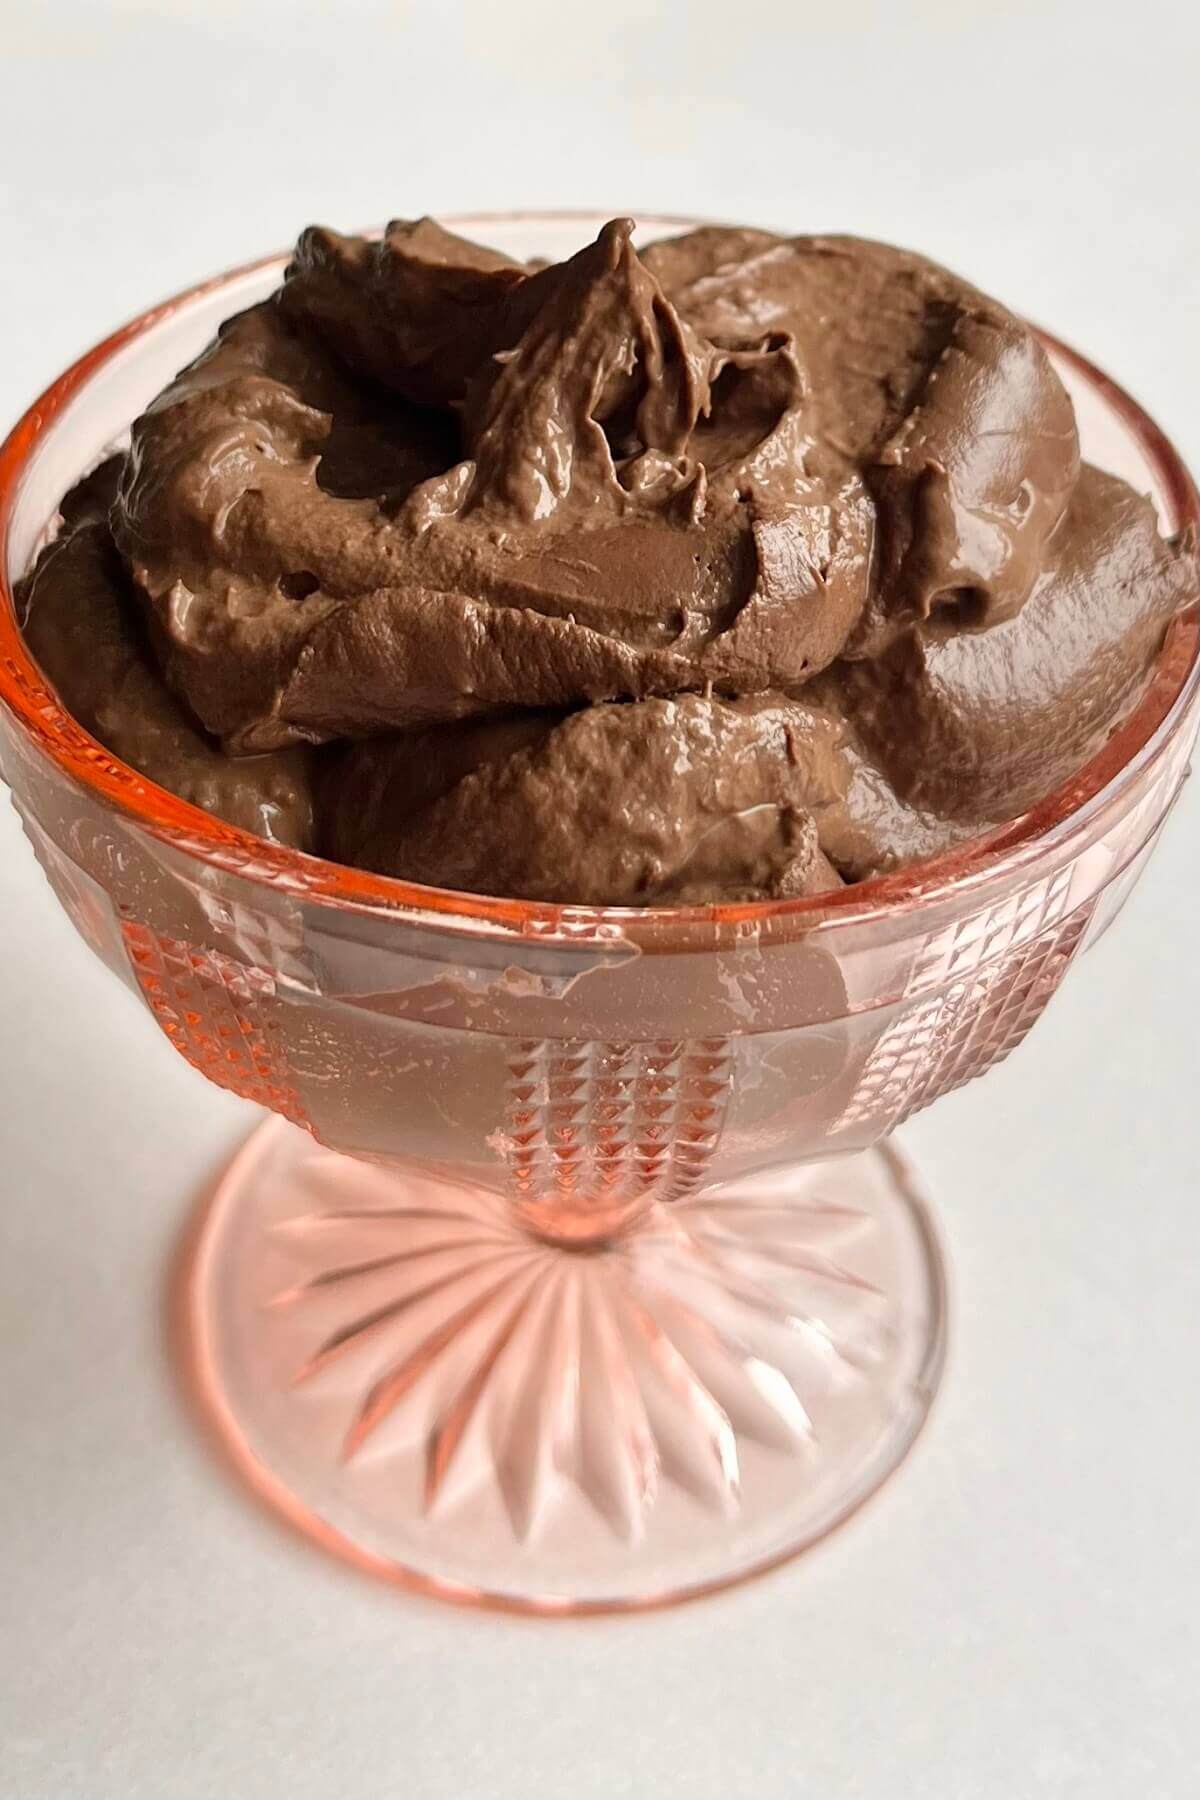 A serving of chocolate mousse in a pink glass dish.